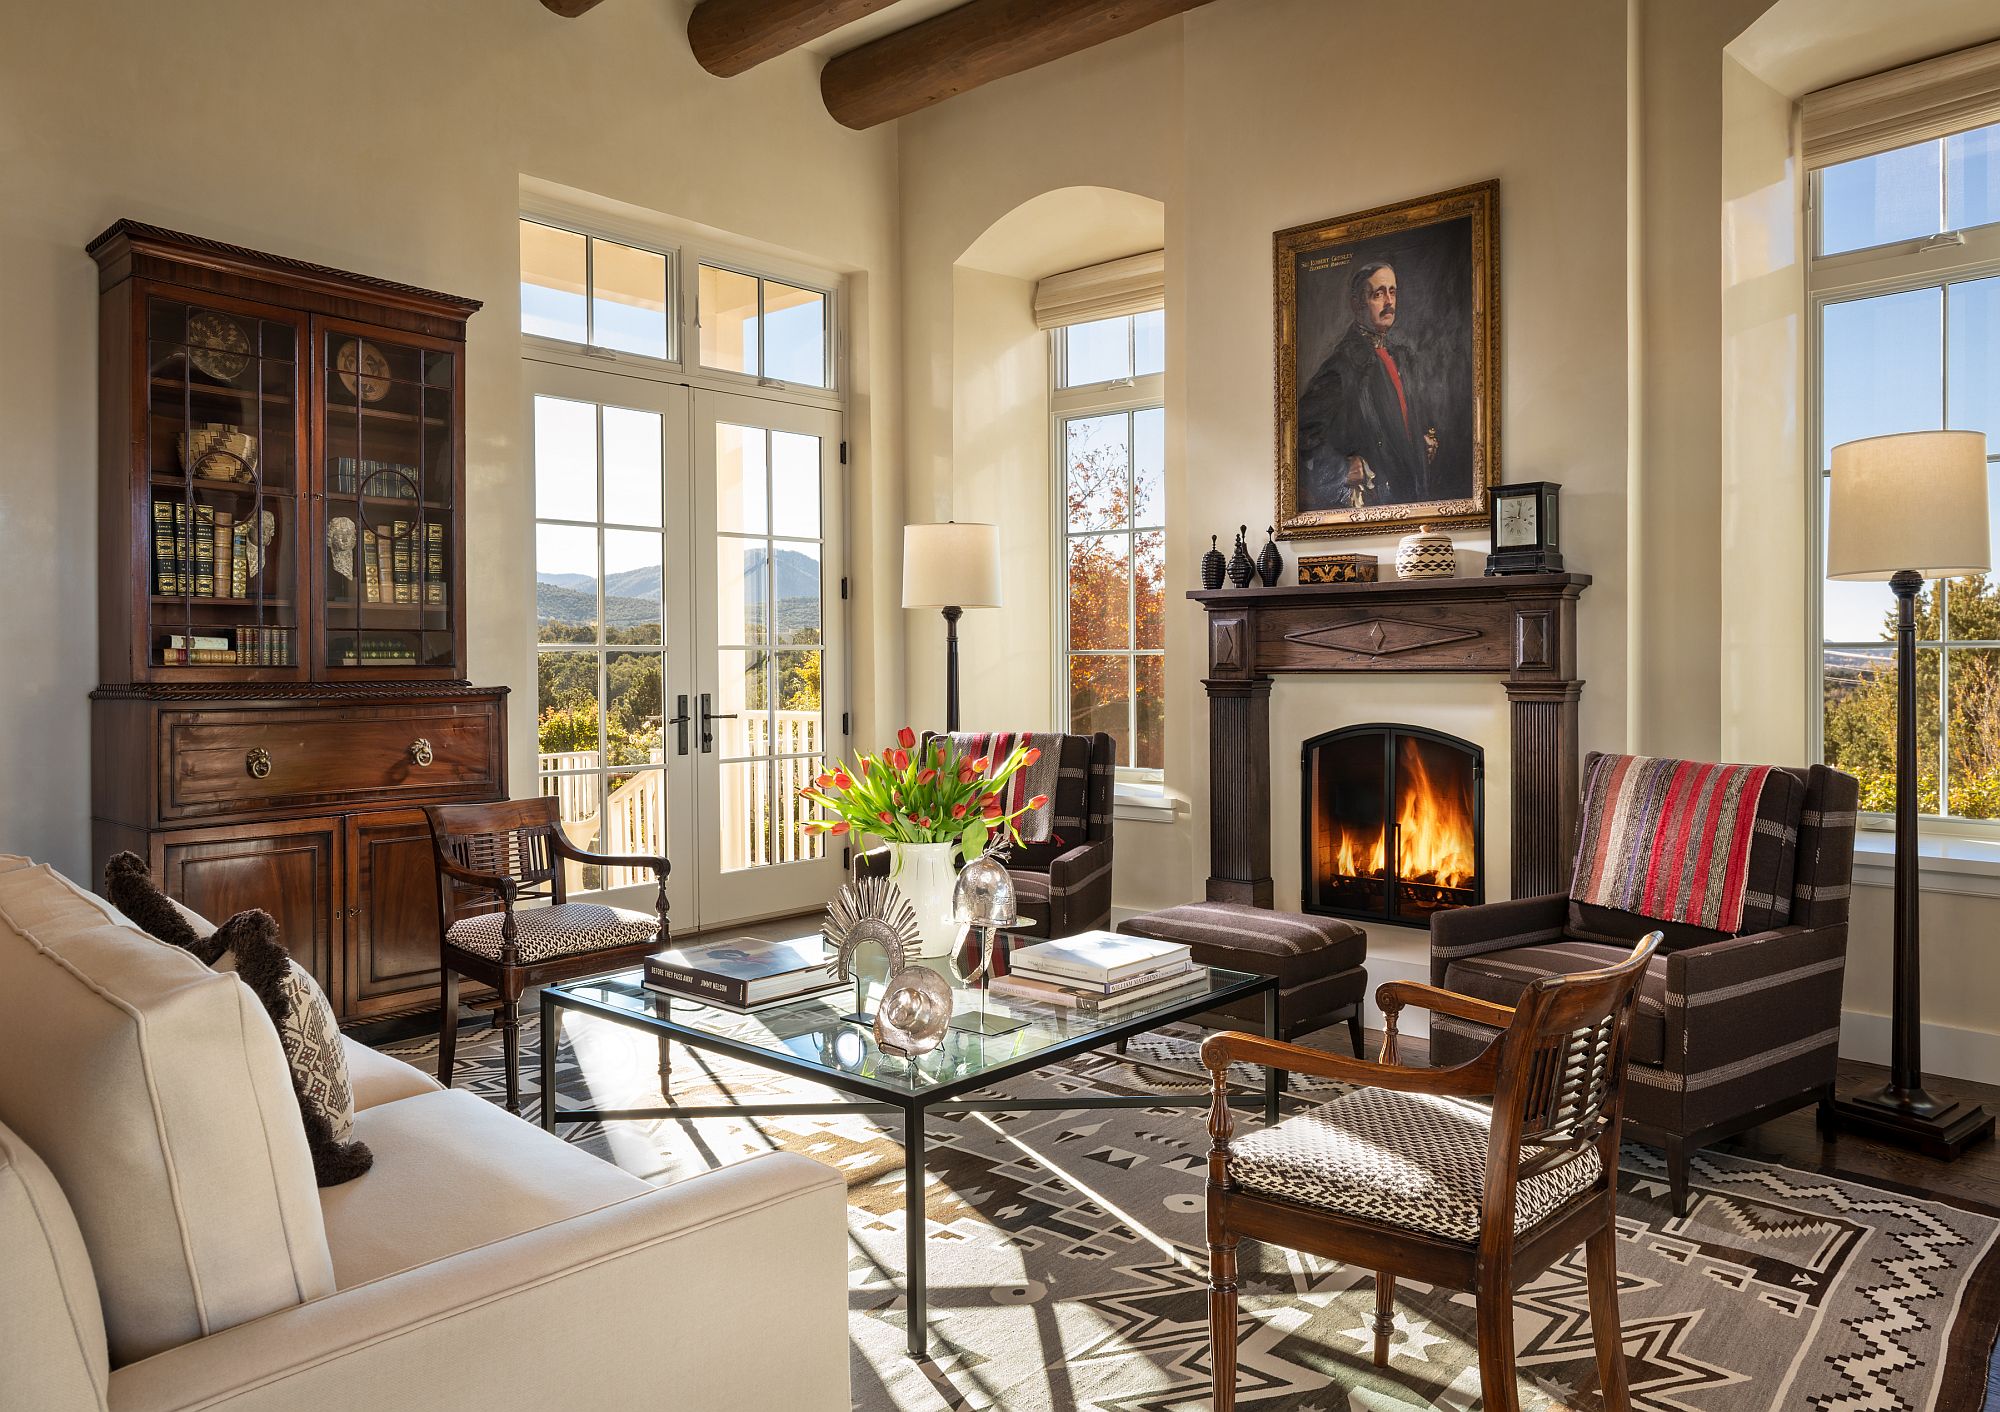 Spacious living room with a cozy fireplace at its heart